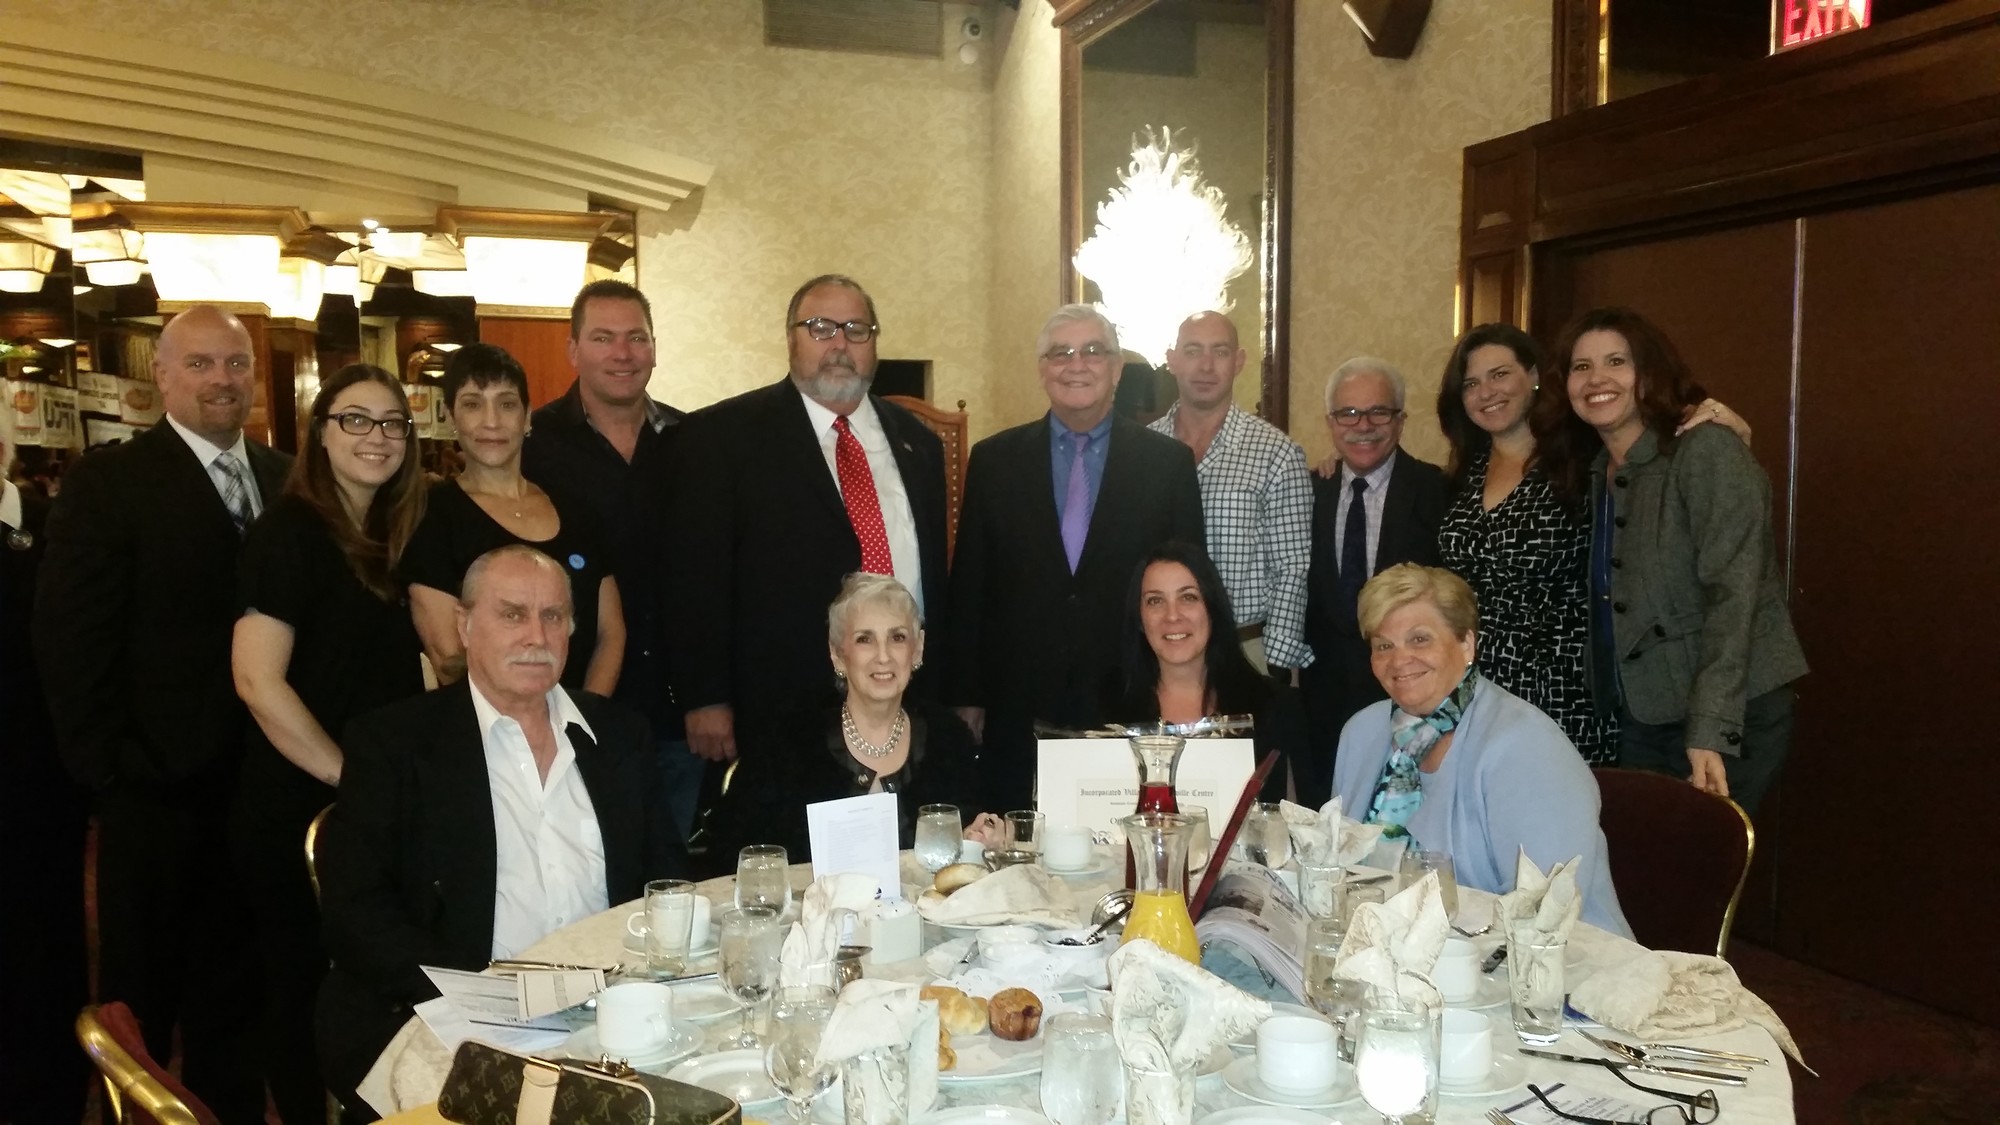 Shannon McComb, seated second from right, celebrated her win as the Rockville Centre Businessperson of the Year at the Crest Hollow Country Club on Oct. 17. She was joined by other members of the Chamber of Commerce and Rockville Centre Mayor Francis X. Murray, standing fifth from left.